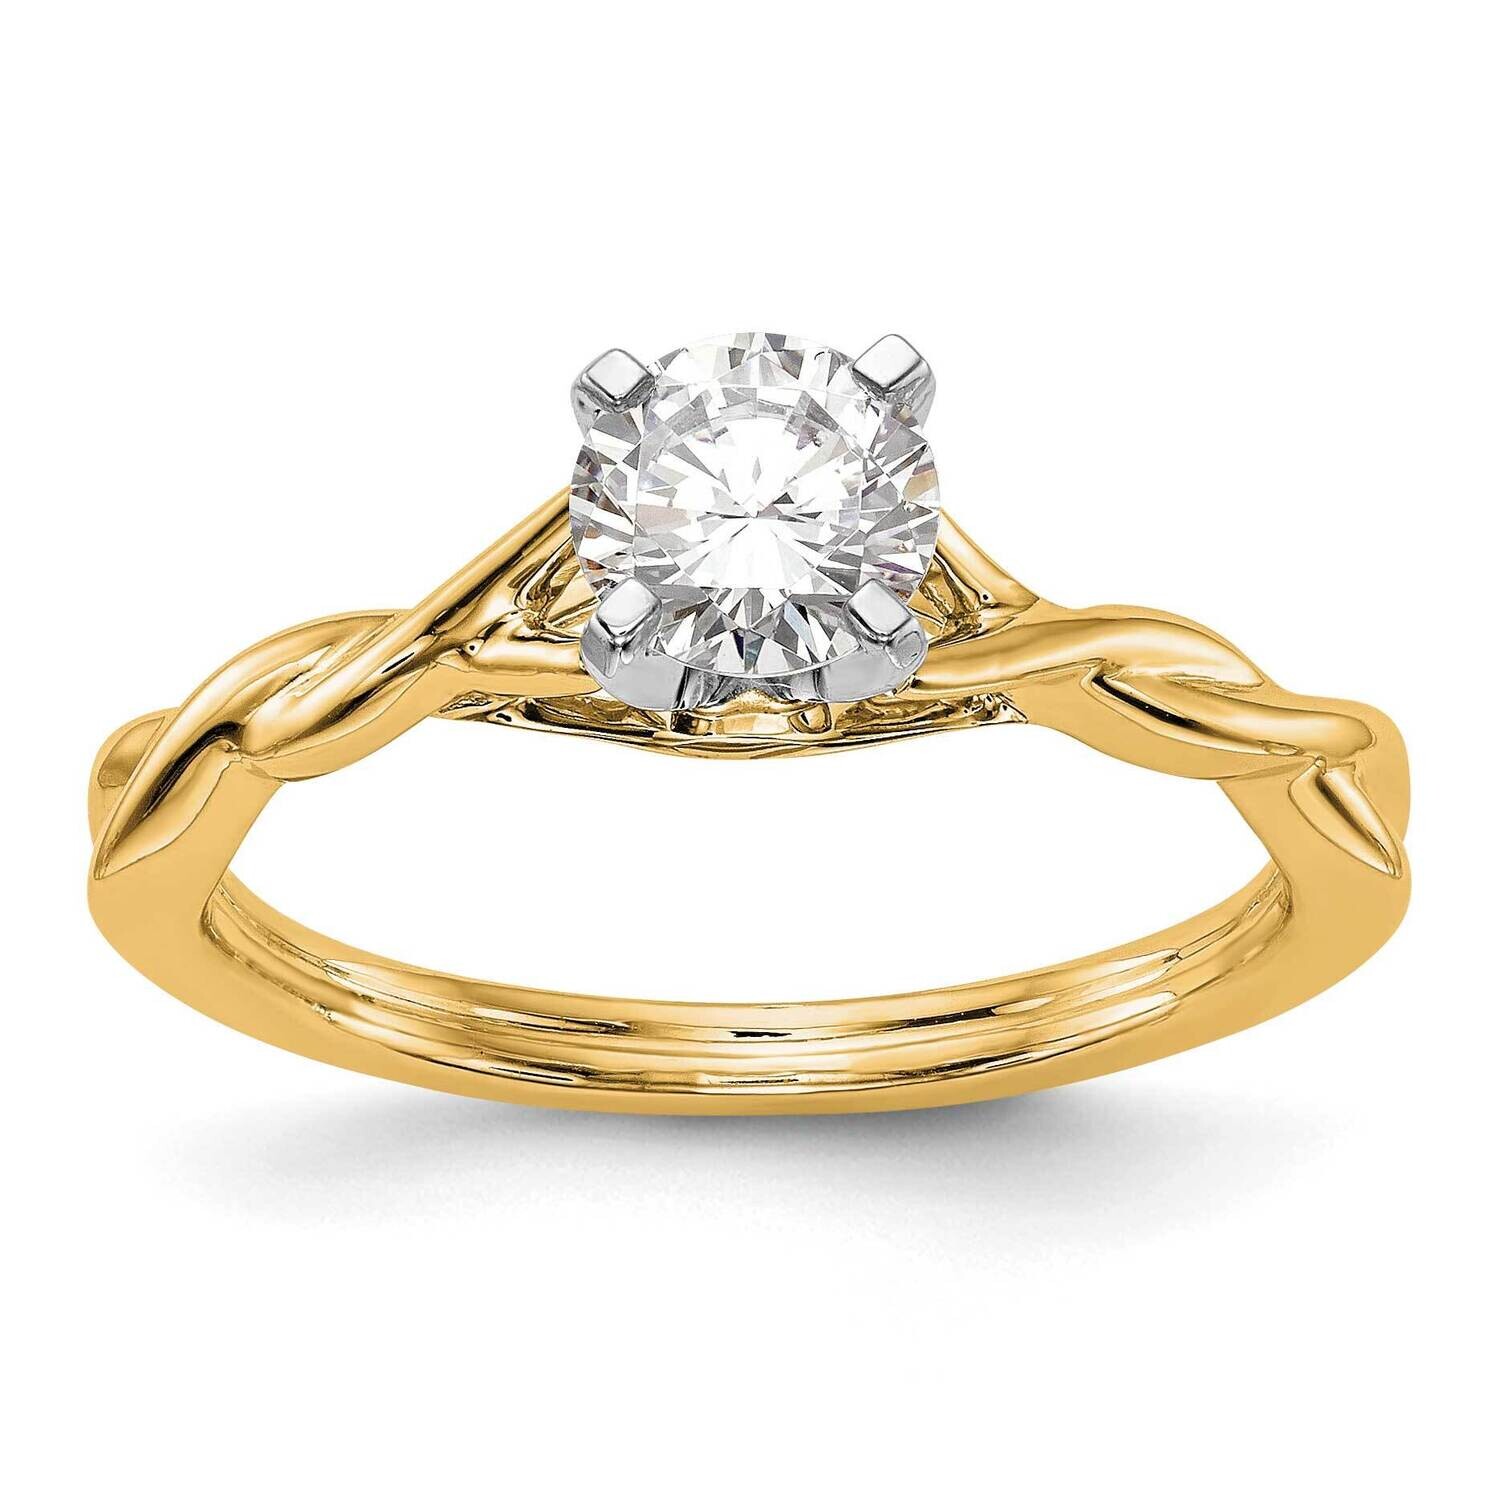 Peg Set Twist Solitaire Engagement Ring Mounting 14k Gold RM1998E-CYAA